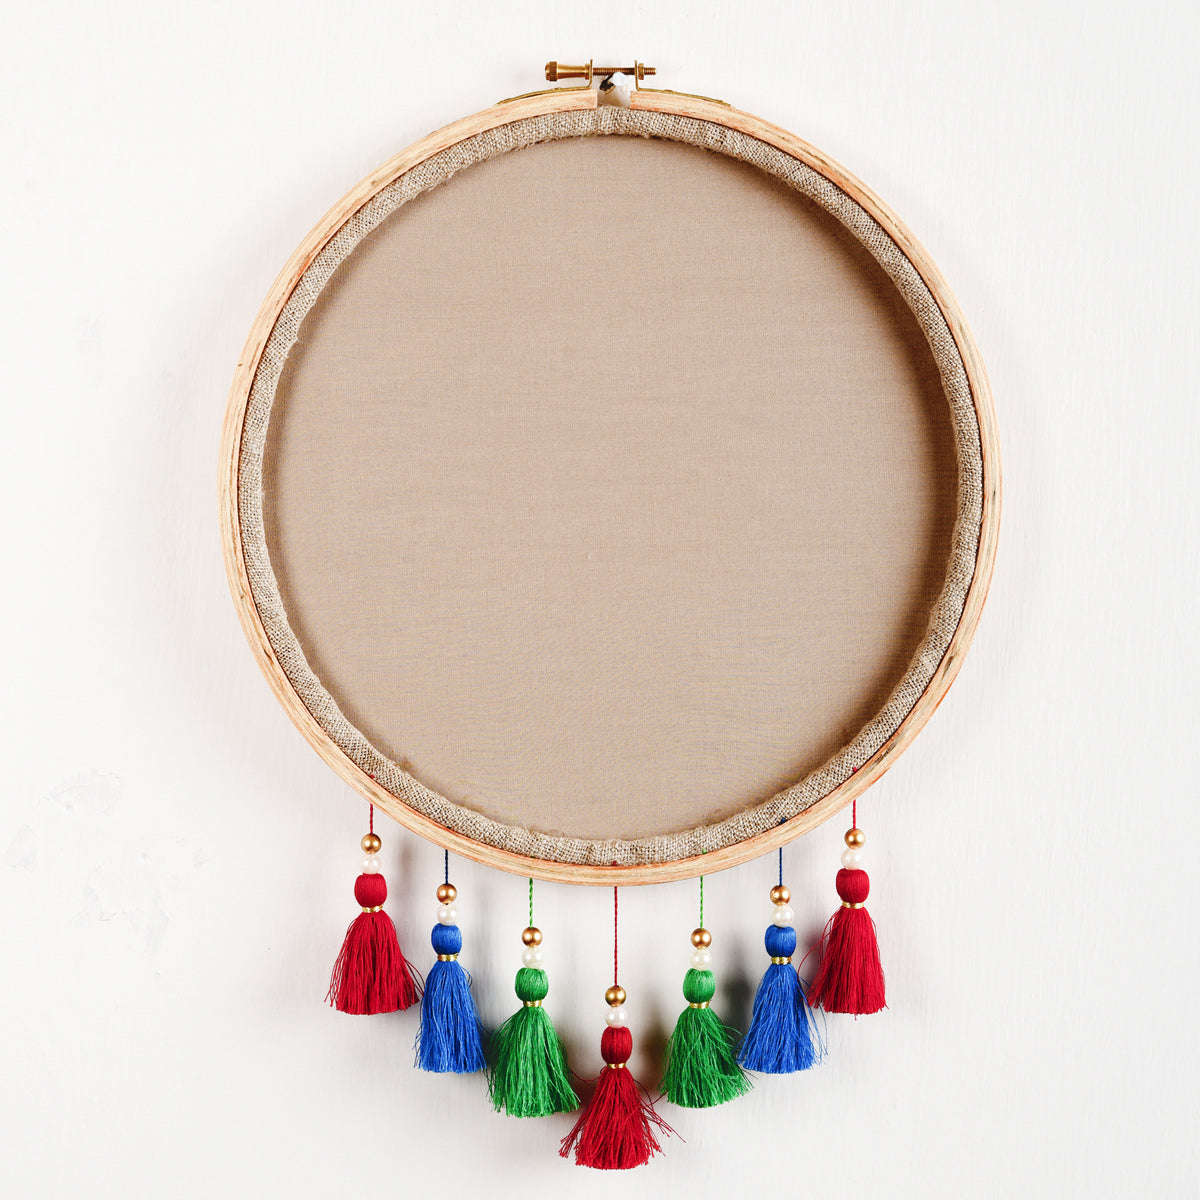 TABLA Musical instrument wall art, embroidery and applique in hoop OR wooden frame